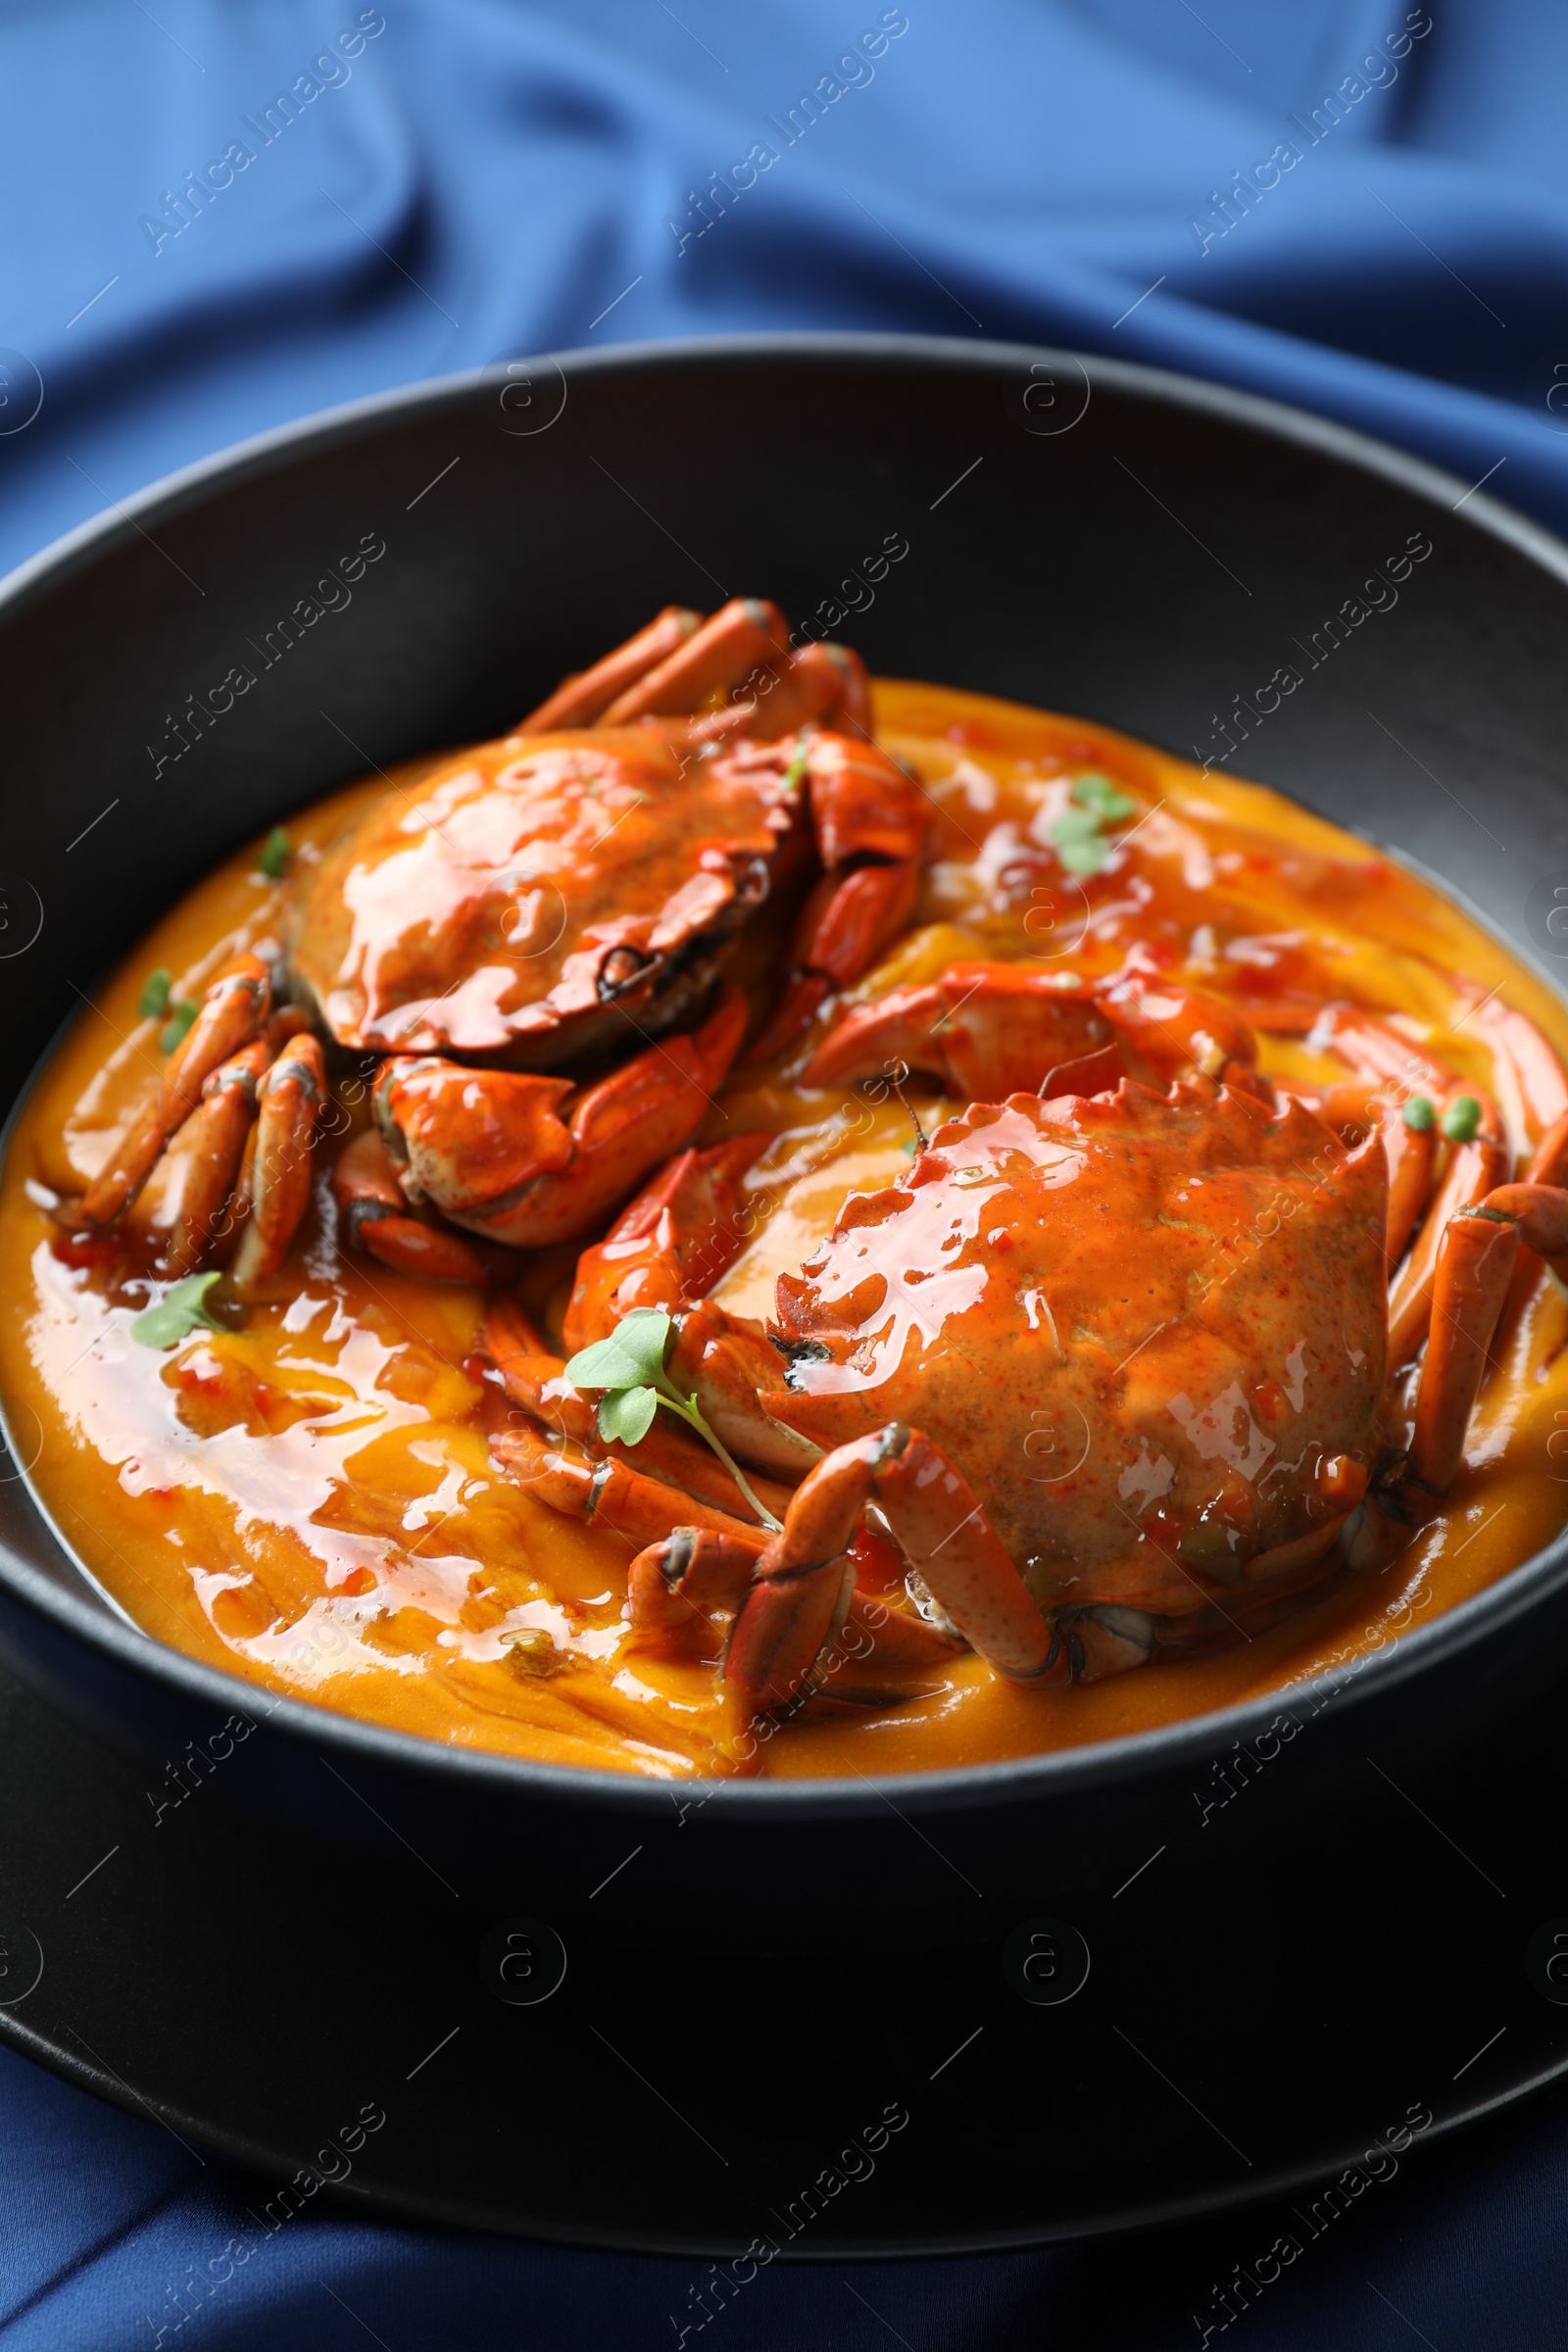 Photo of Delicious boiled crabs with sauce in bowl on blue tablecloth